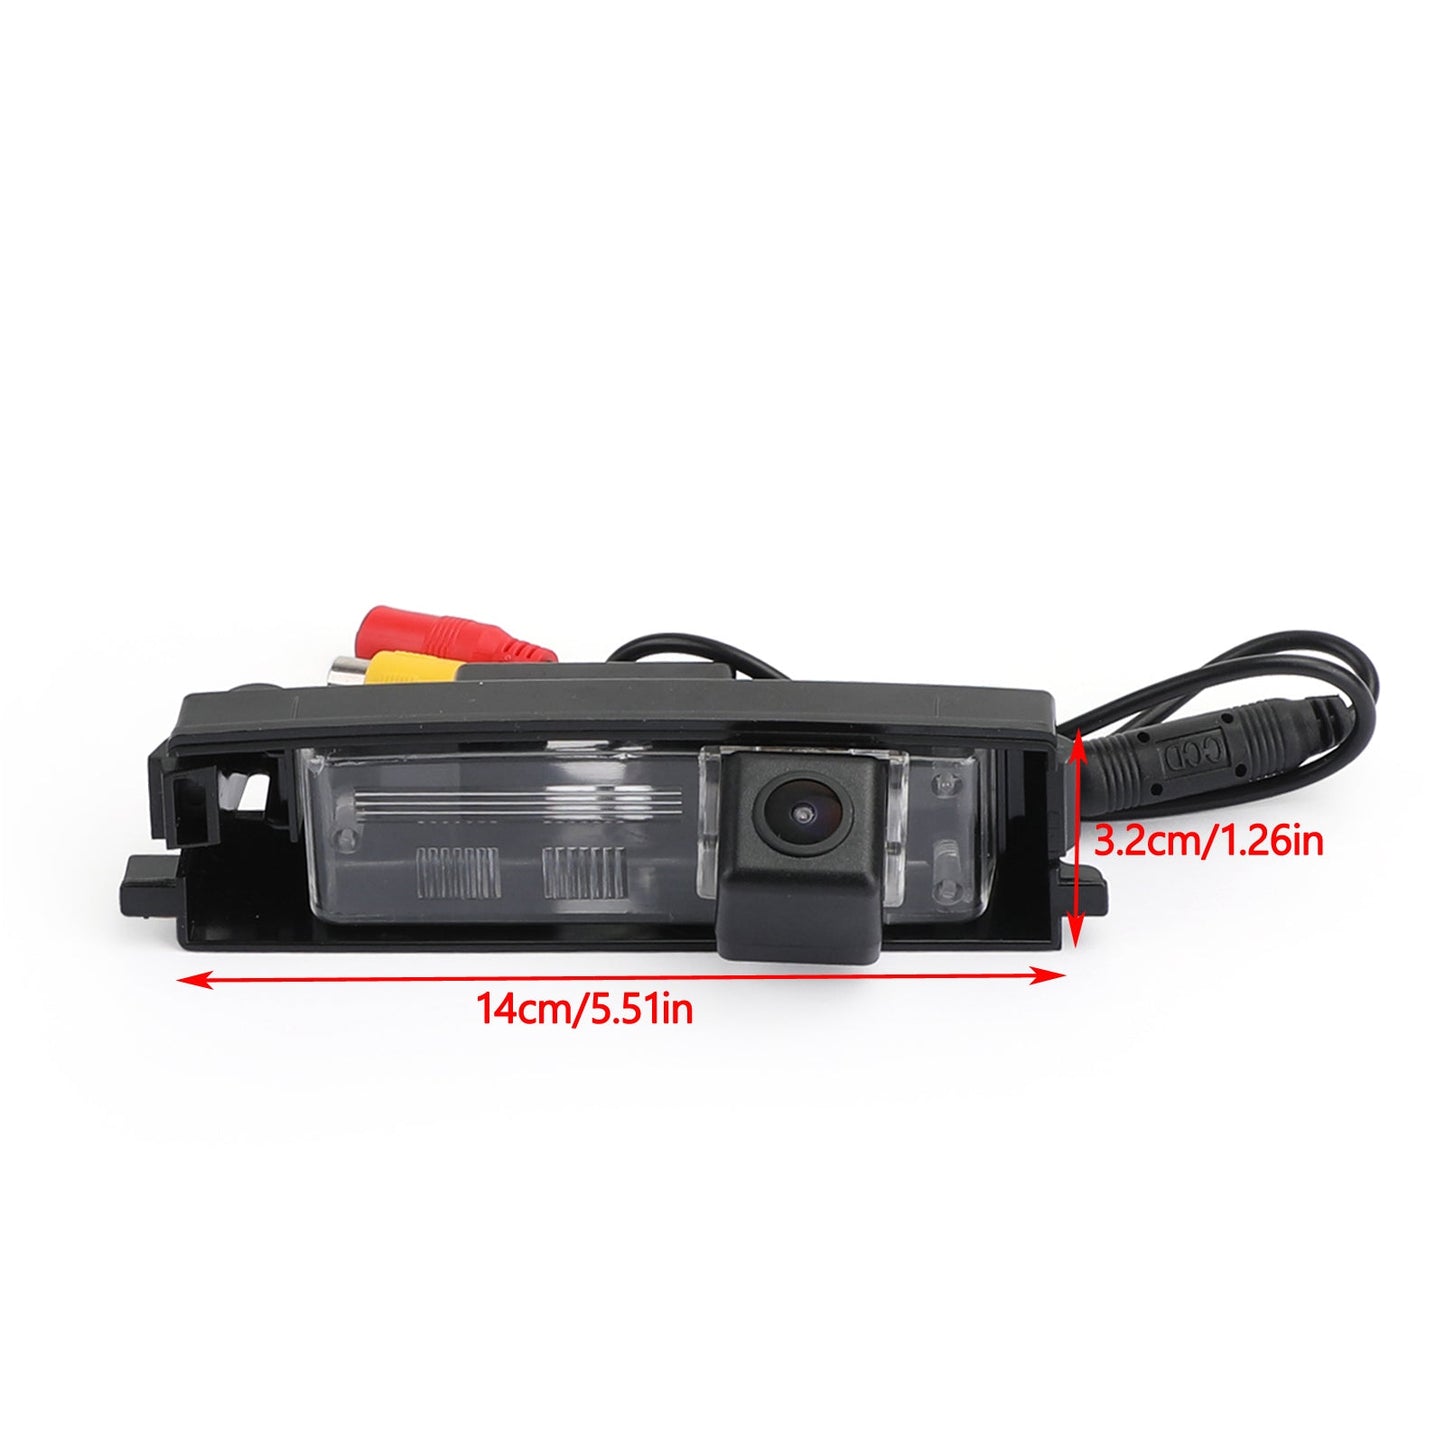 CCD,Reverse Camera,Backup,Parking,Rear View Cams,Weatherproof